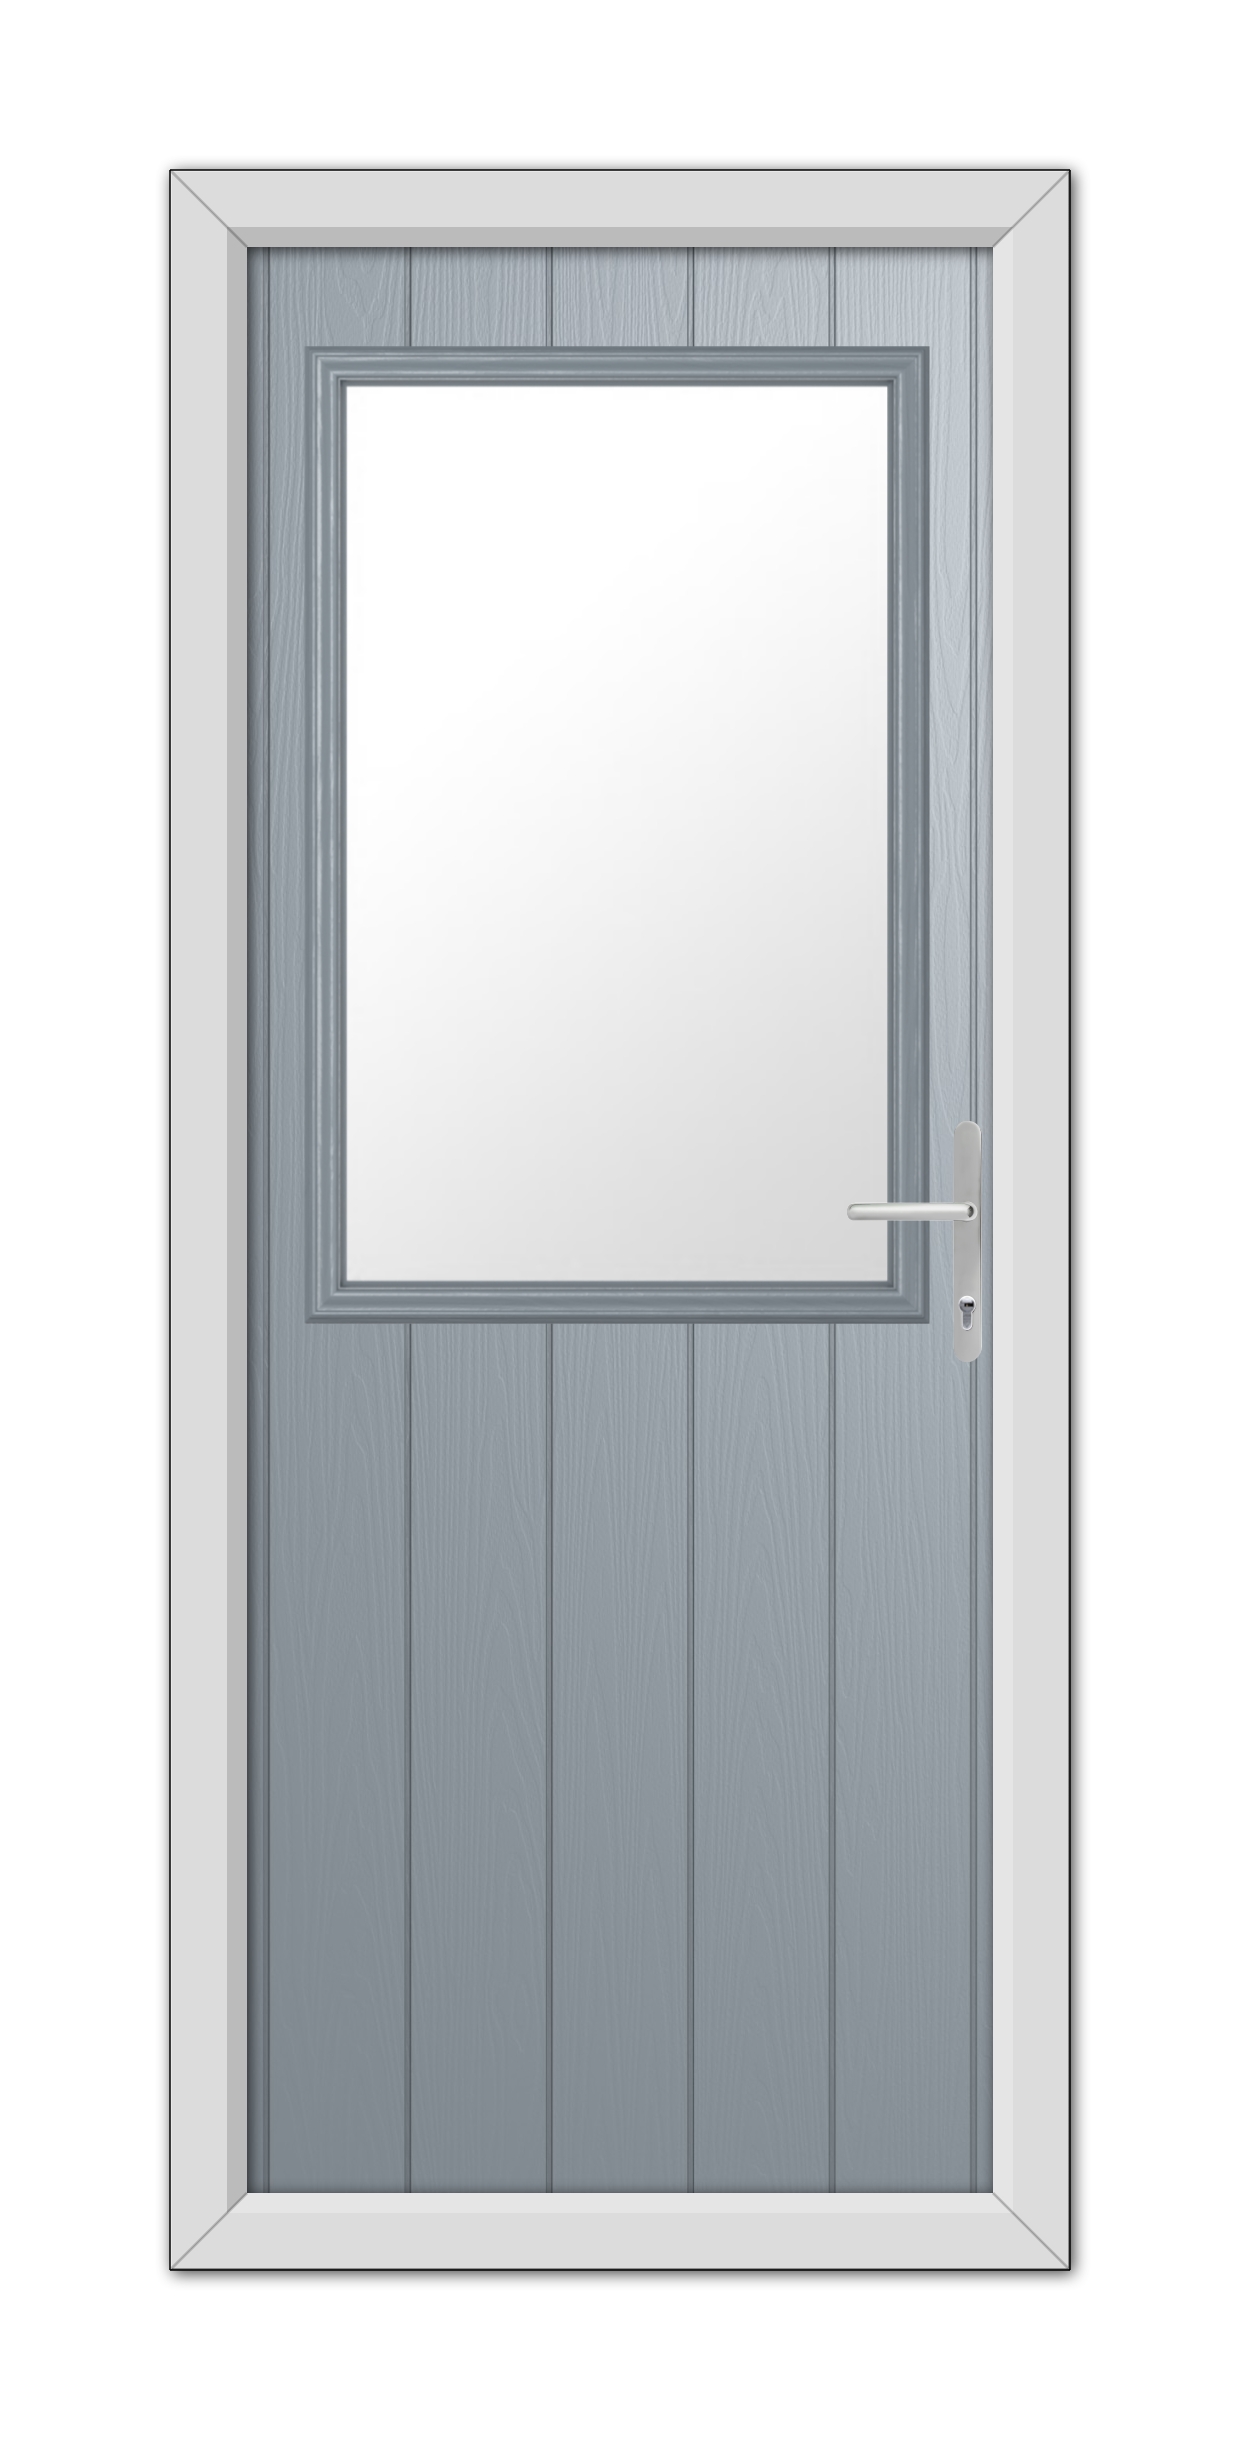 A modern, French Grey Clifton composite door with a large square glass panel, featuring a metallic handle on the right side, set within a white frame.